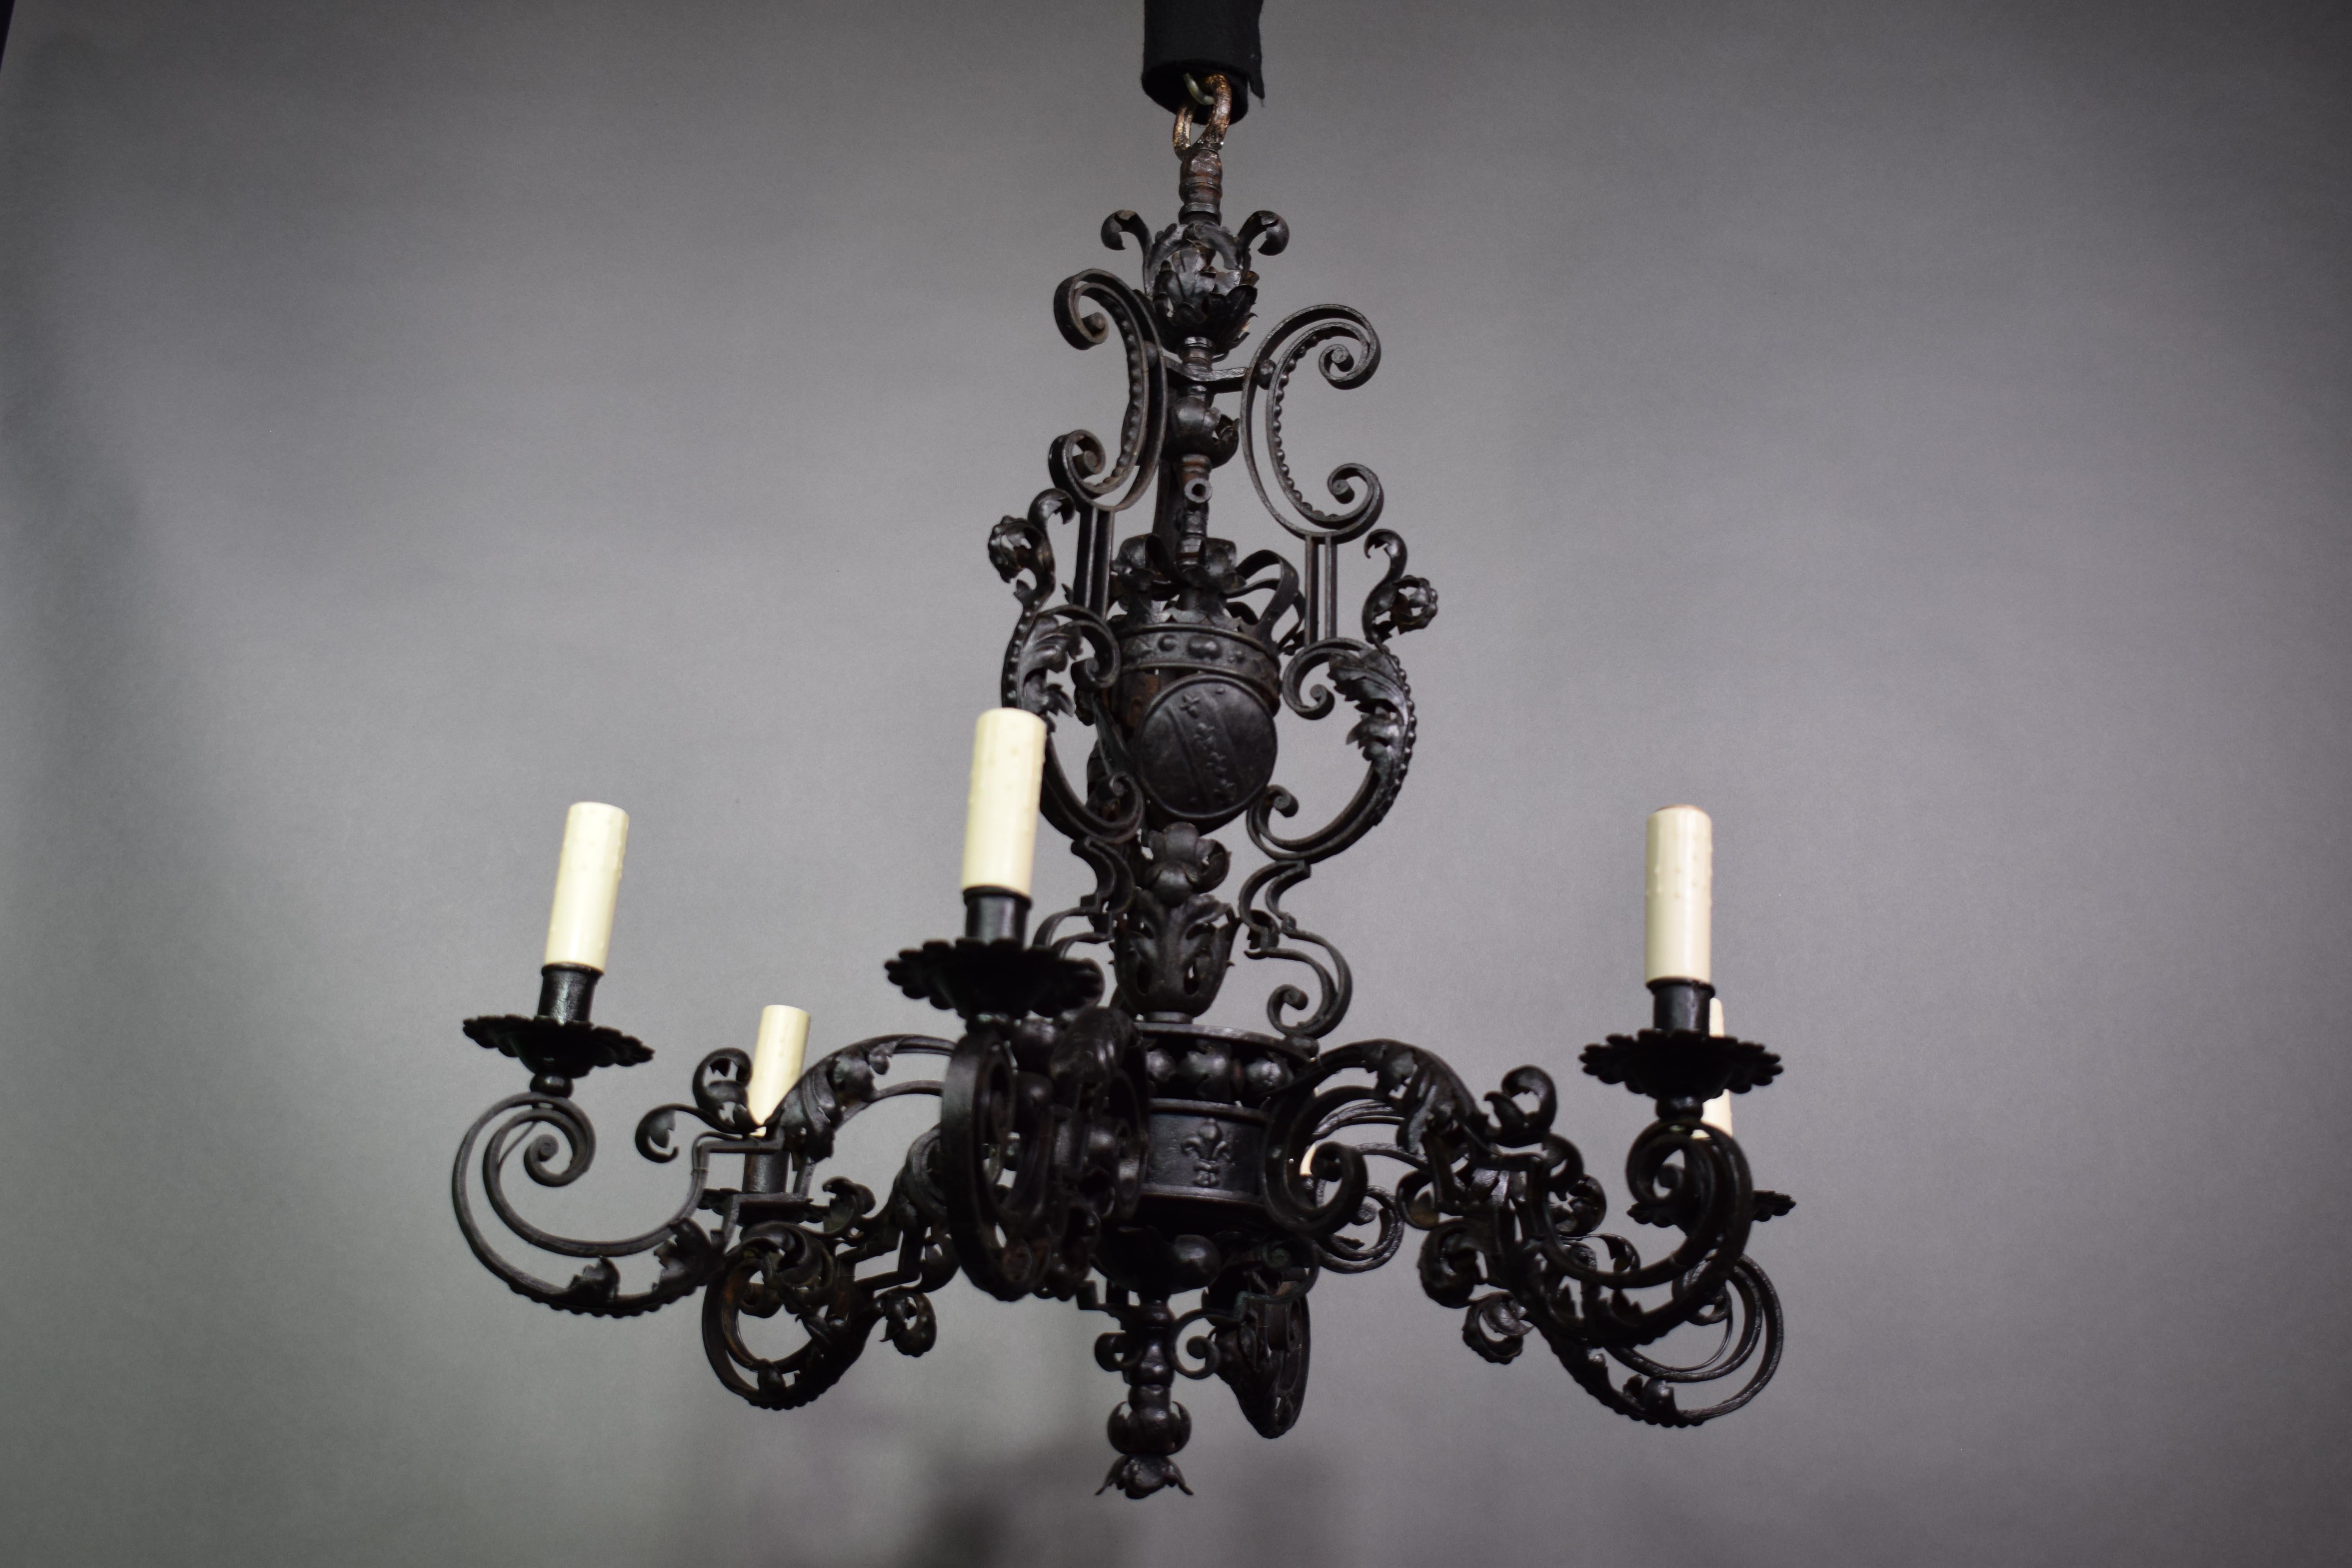 A very fine iron chandelier featuring round shields and S-shaped arms with hand hammered acanthus leaves. France, circa 1900. 6 lights
Measures: 40